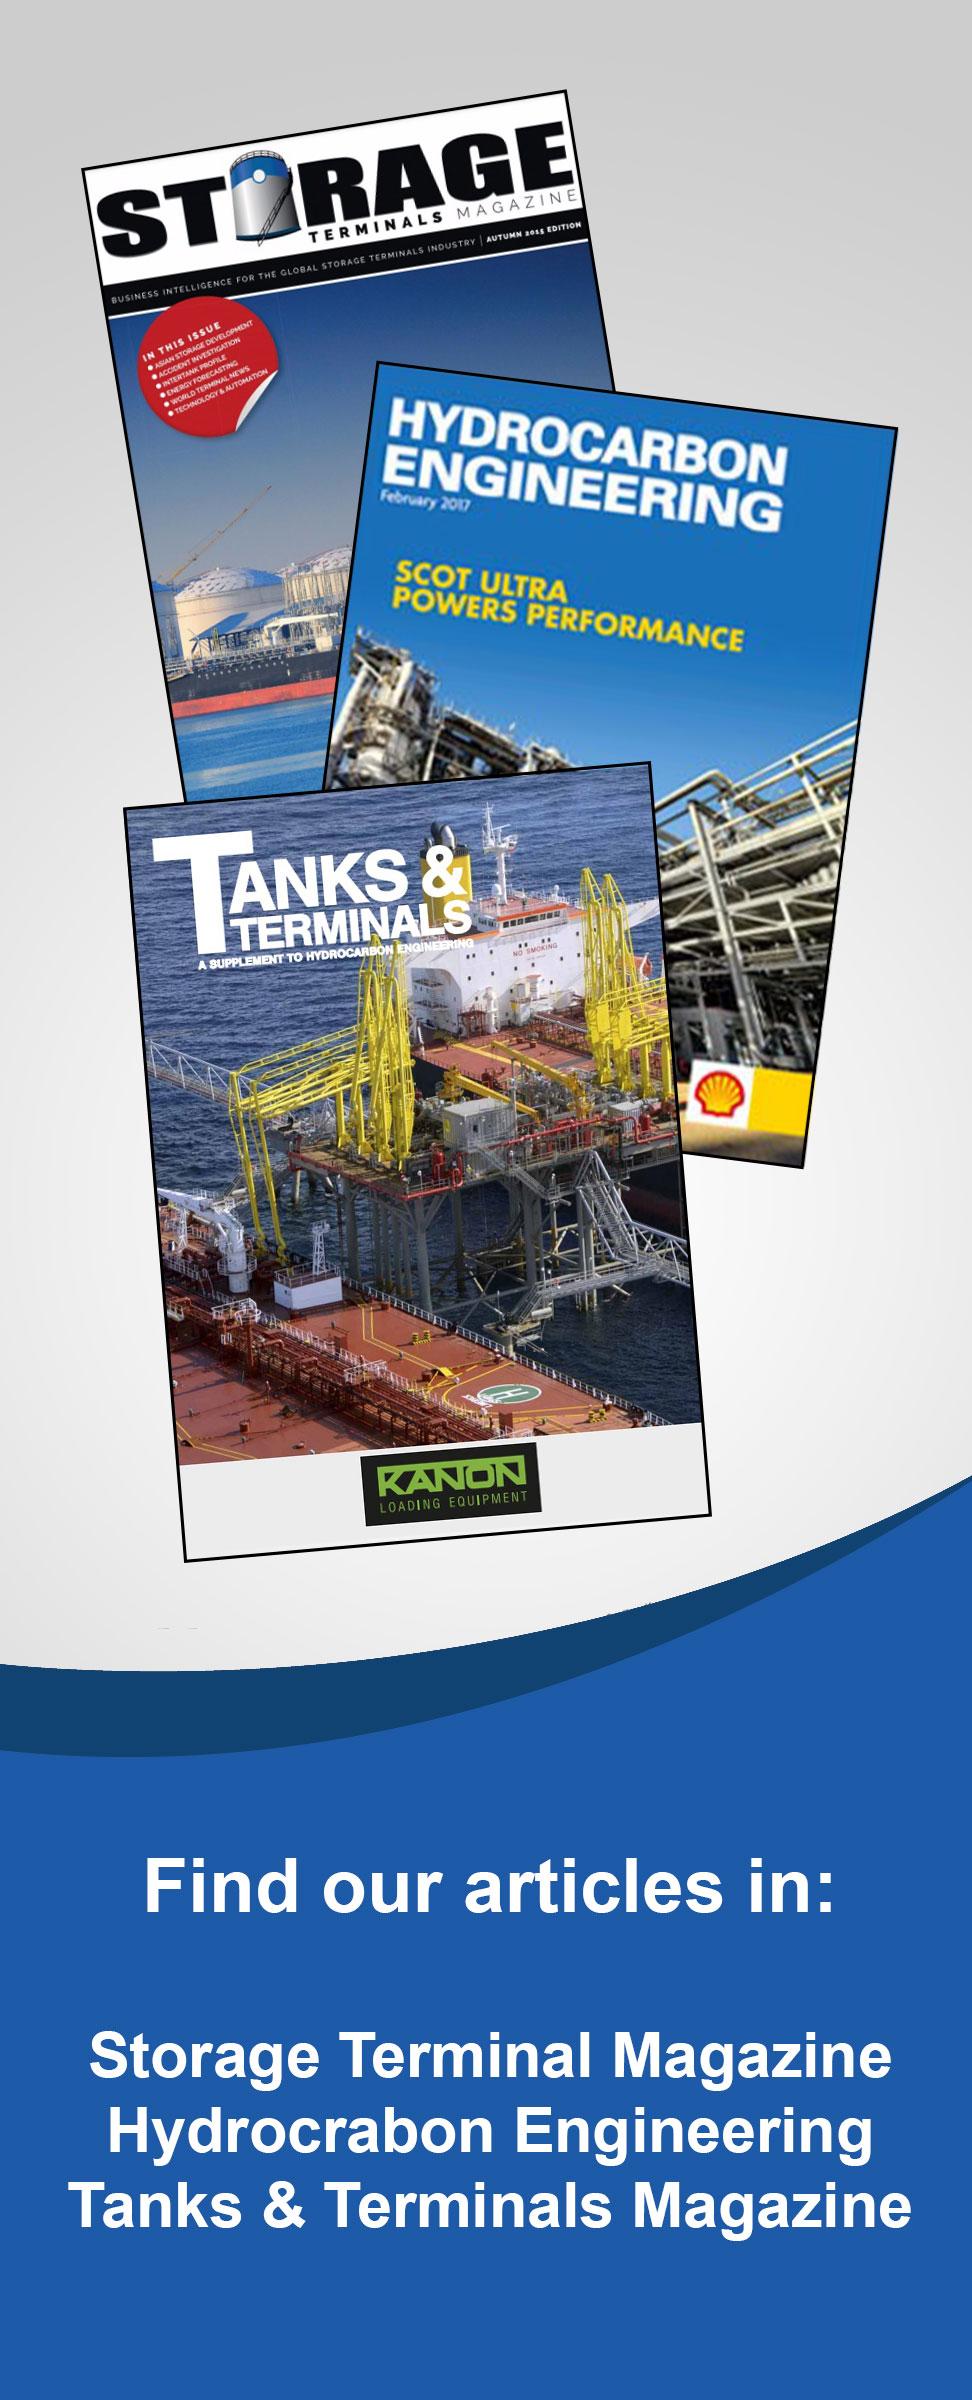 Find our articles and advertisements in Storage Terminals Magazine, Hydrocarbon Magazine, and Tanks & Terminals Magazine